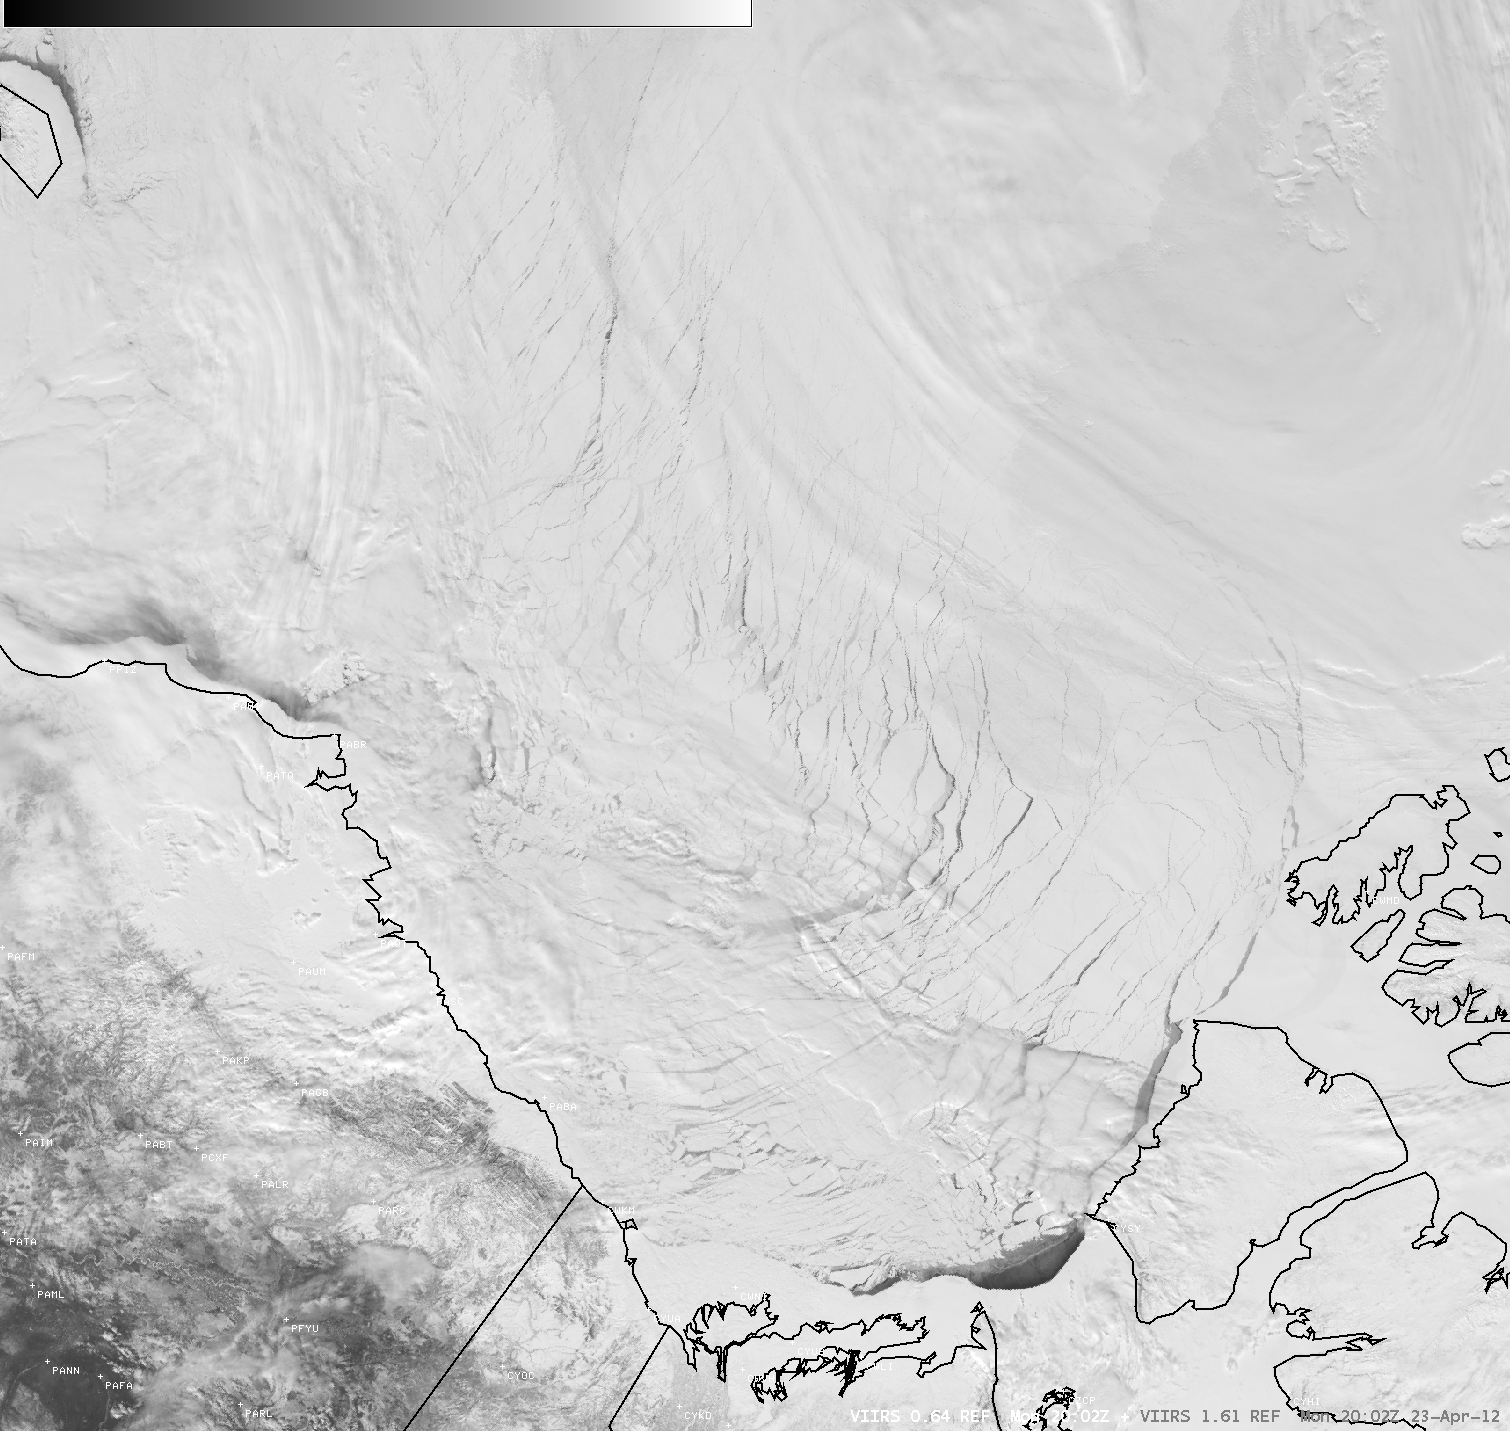 Suomi NPP VIIRS 0.64 Âµm visible channel + 1.61 Âµm near-IR channel images